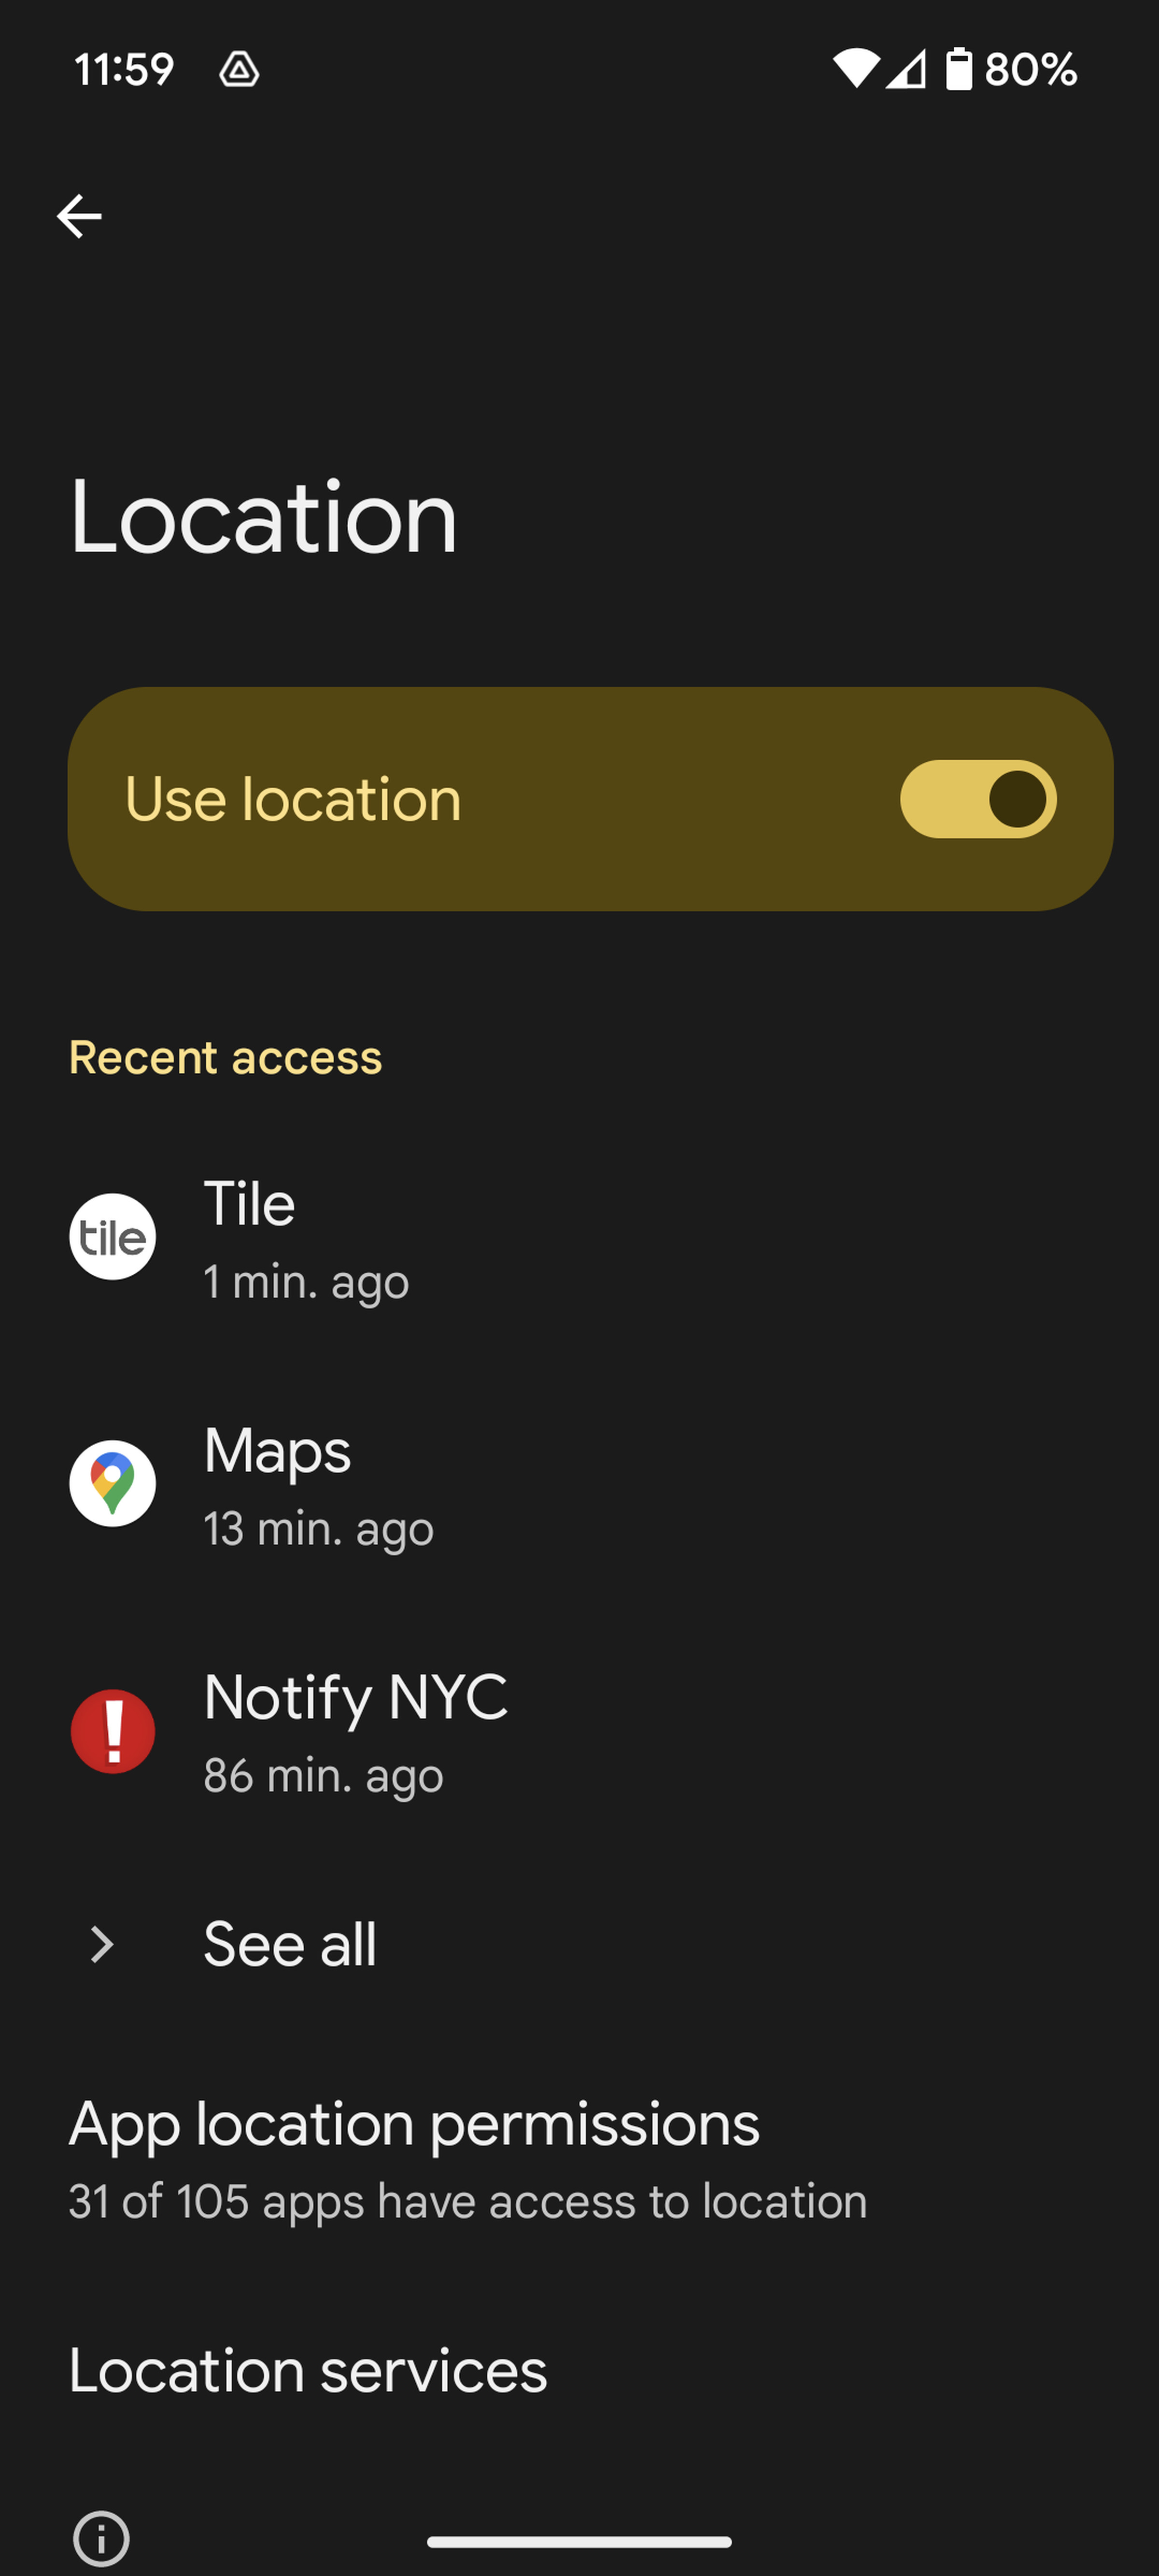 Location page with toggle for Use location below the title, and a list of recently accessed apps below that.